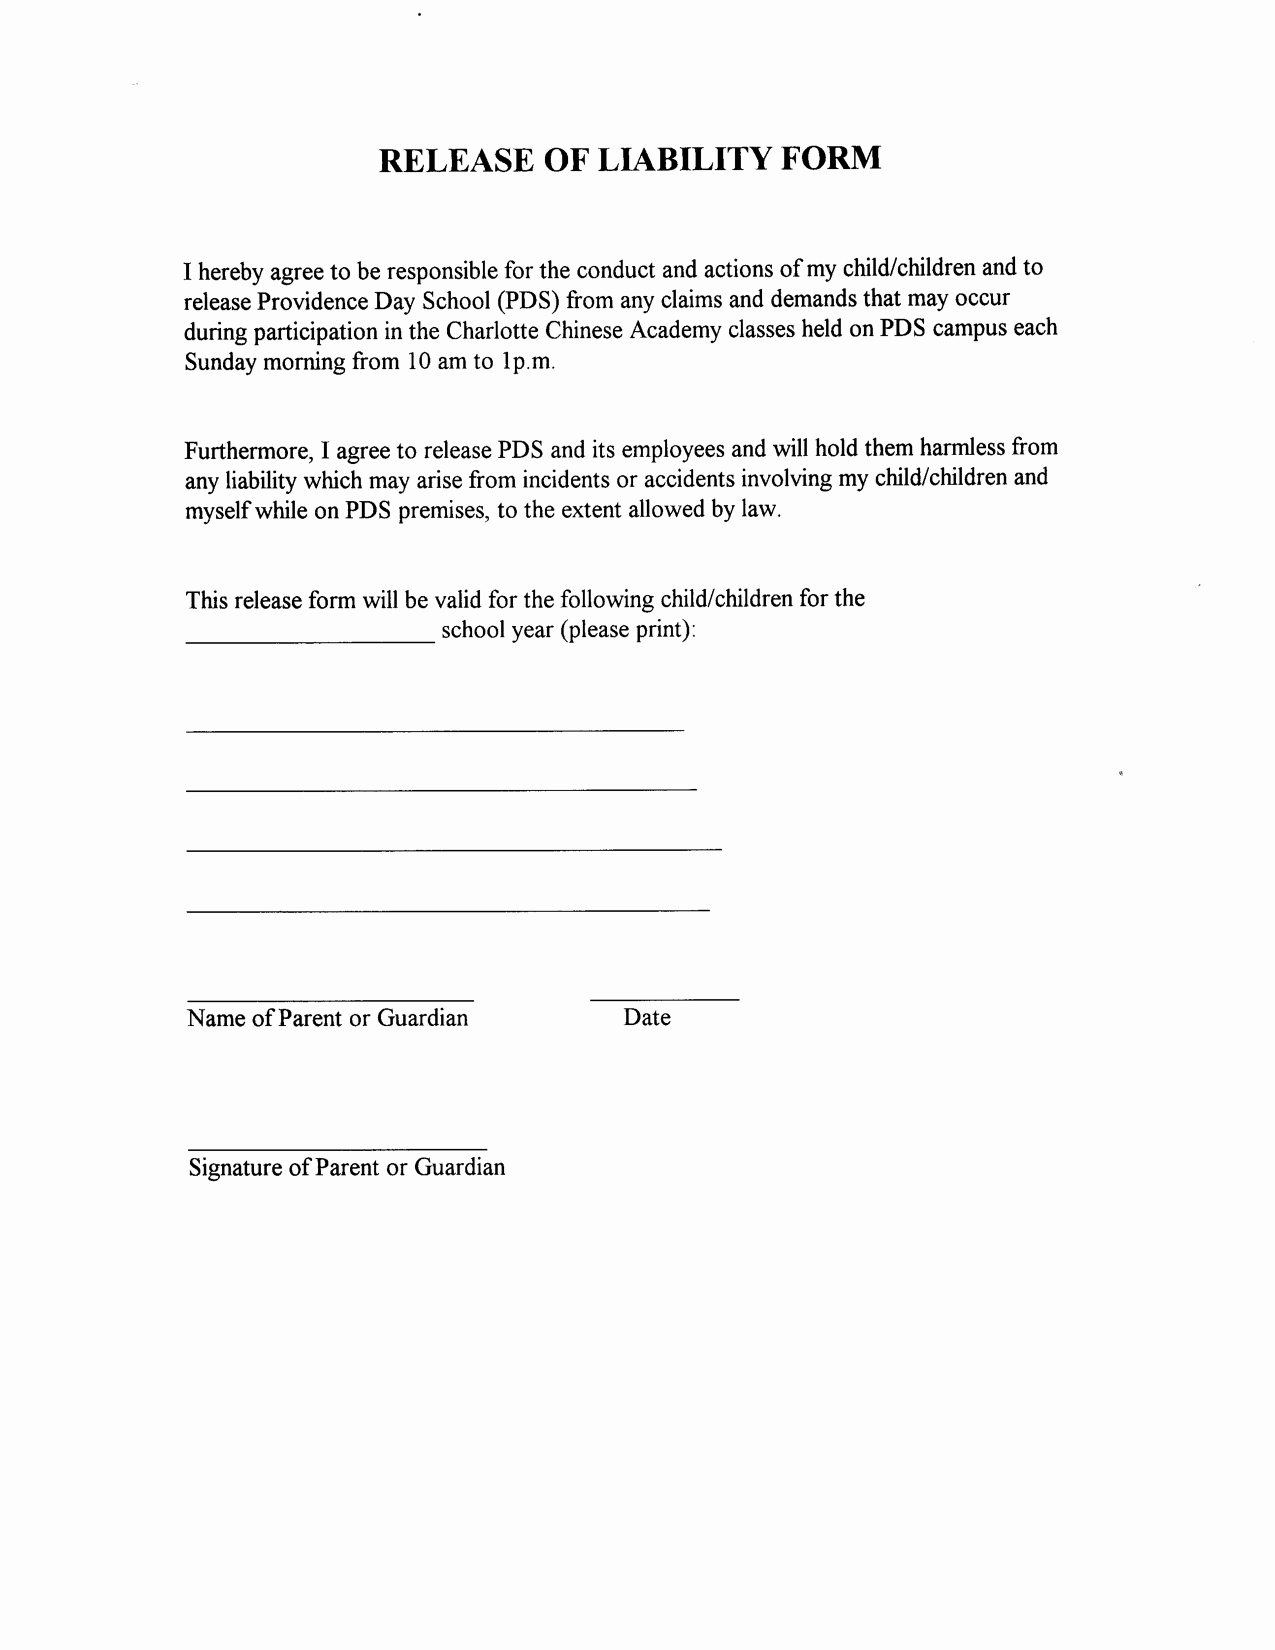 Release Of Liability form Pdf Awesome Liability Release form Template Free Printable Documents